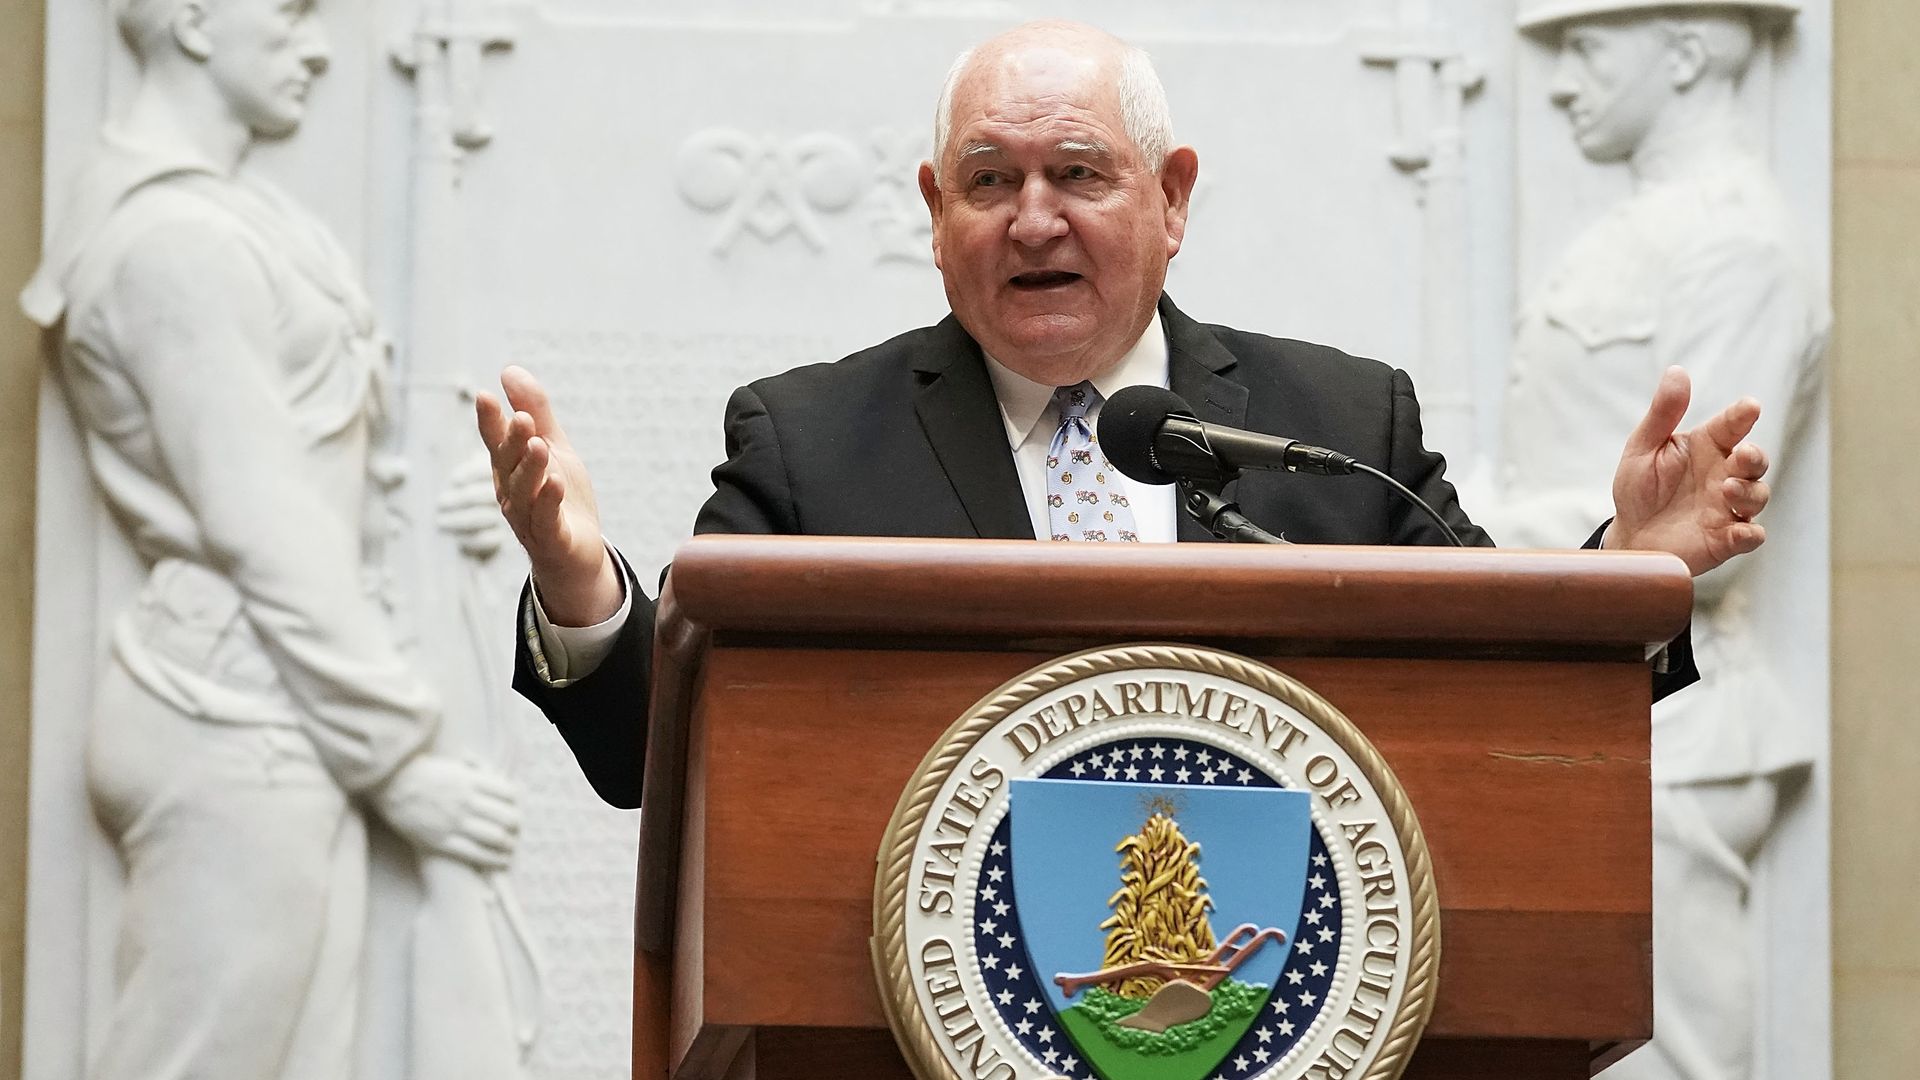 In this image, Sonny Perdue speaks at a podium.